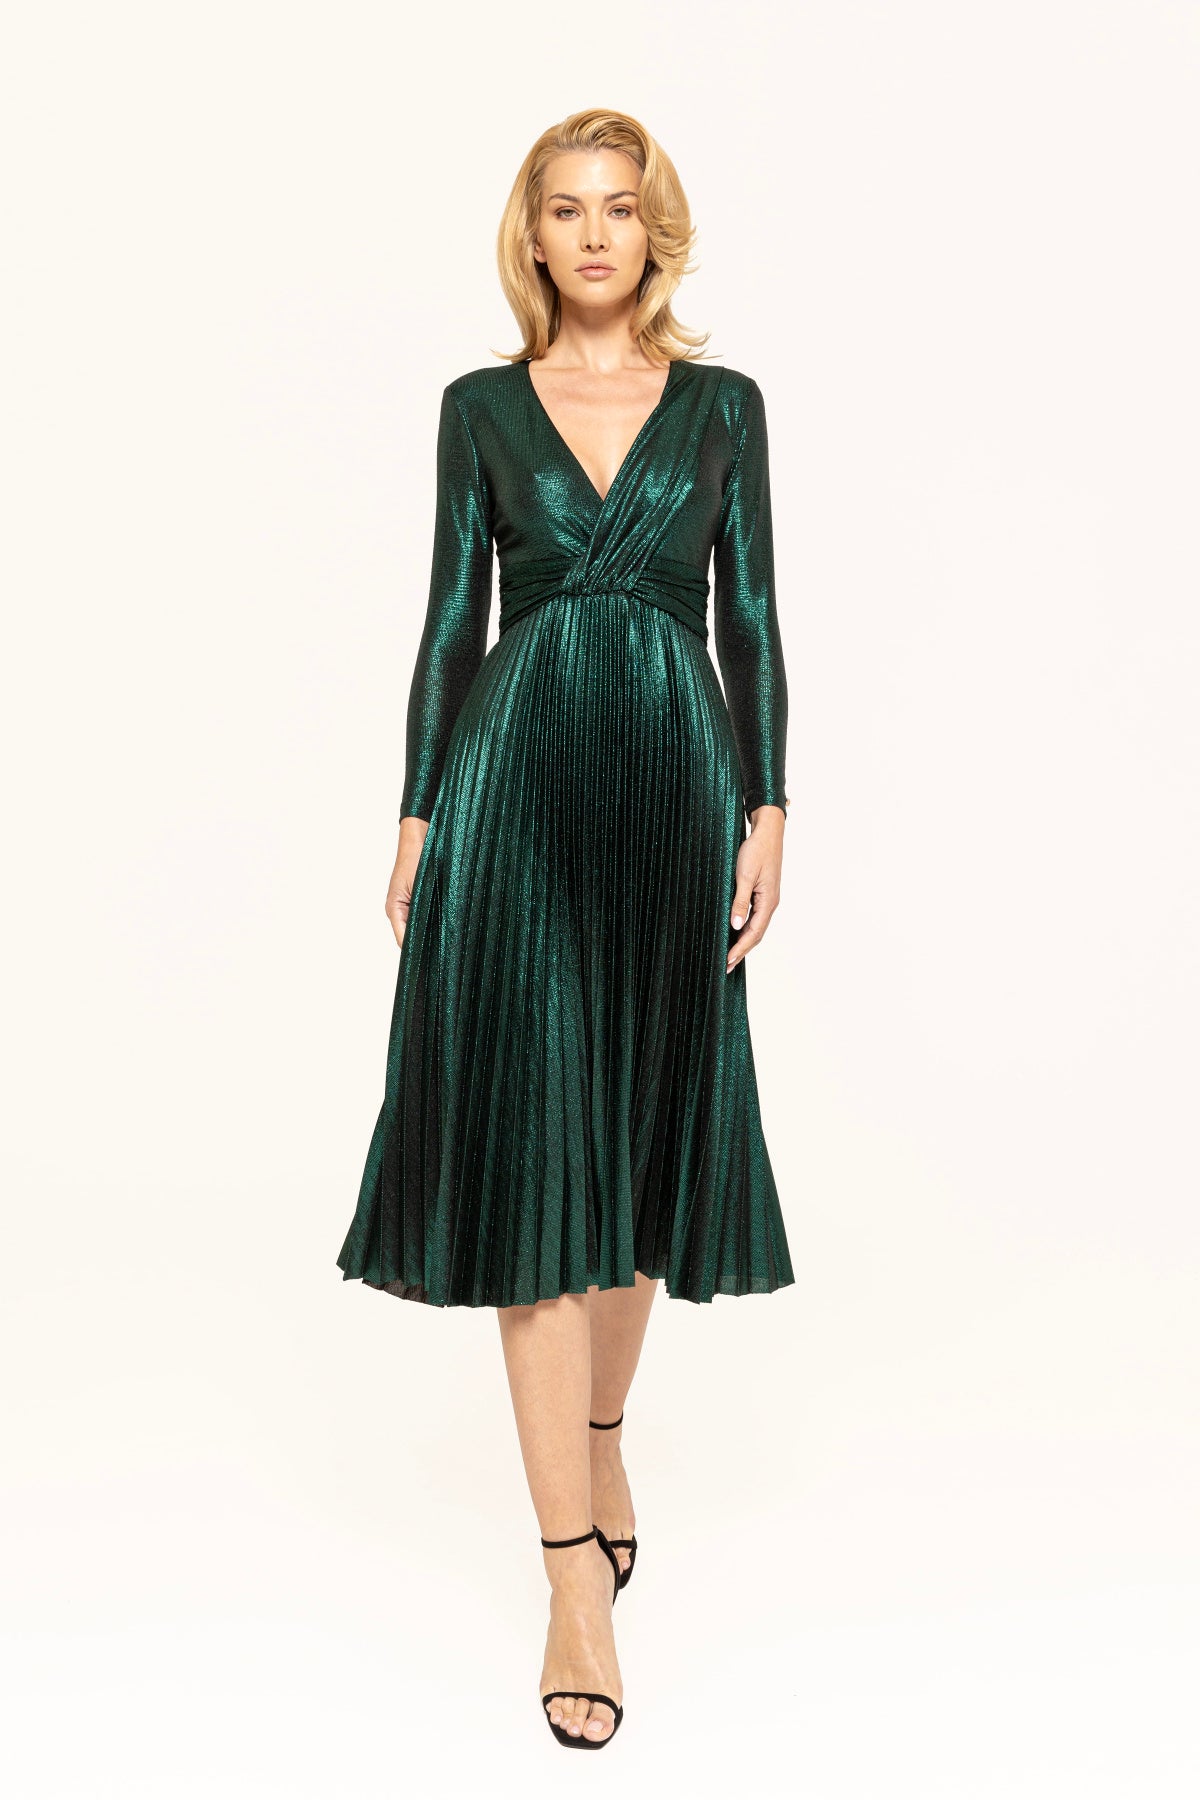 Green Lamé Dress with Pleated Skirt